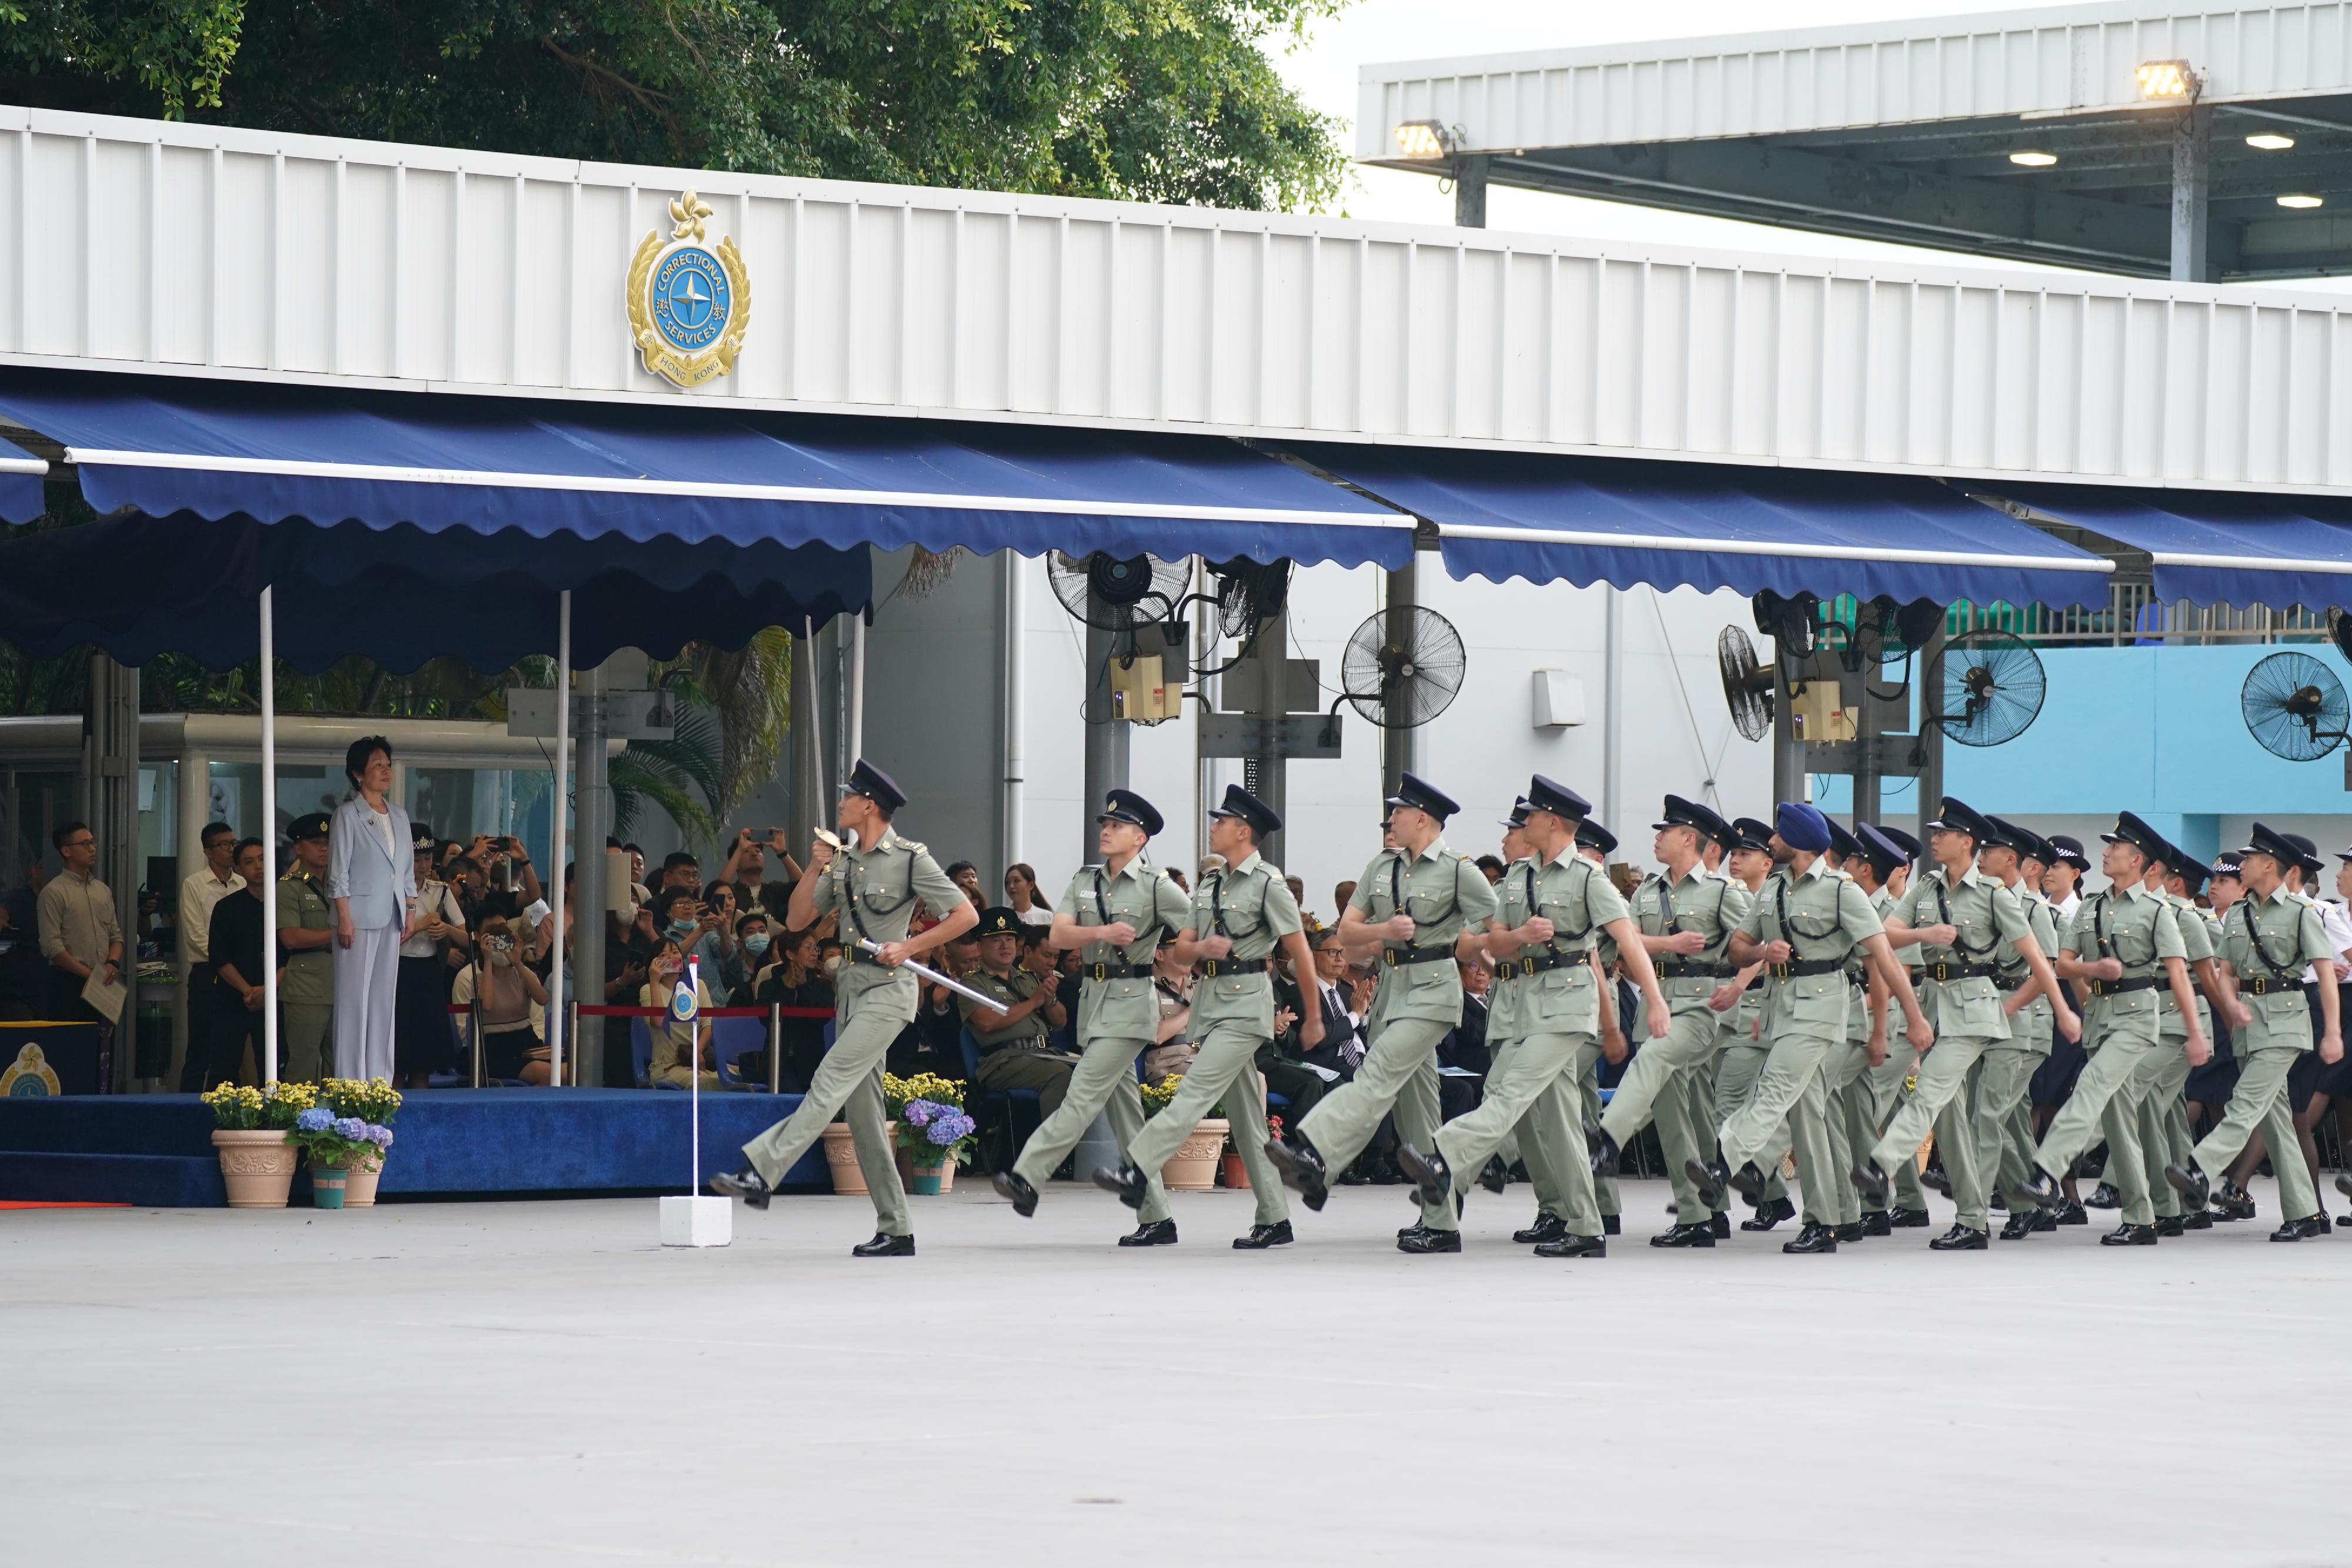 The Correctional Services Department held a passing-out parade at the Hong Kong Correctional Services Academy today (April 21). Photo shows the parade marching past the dais.